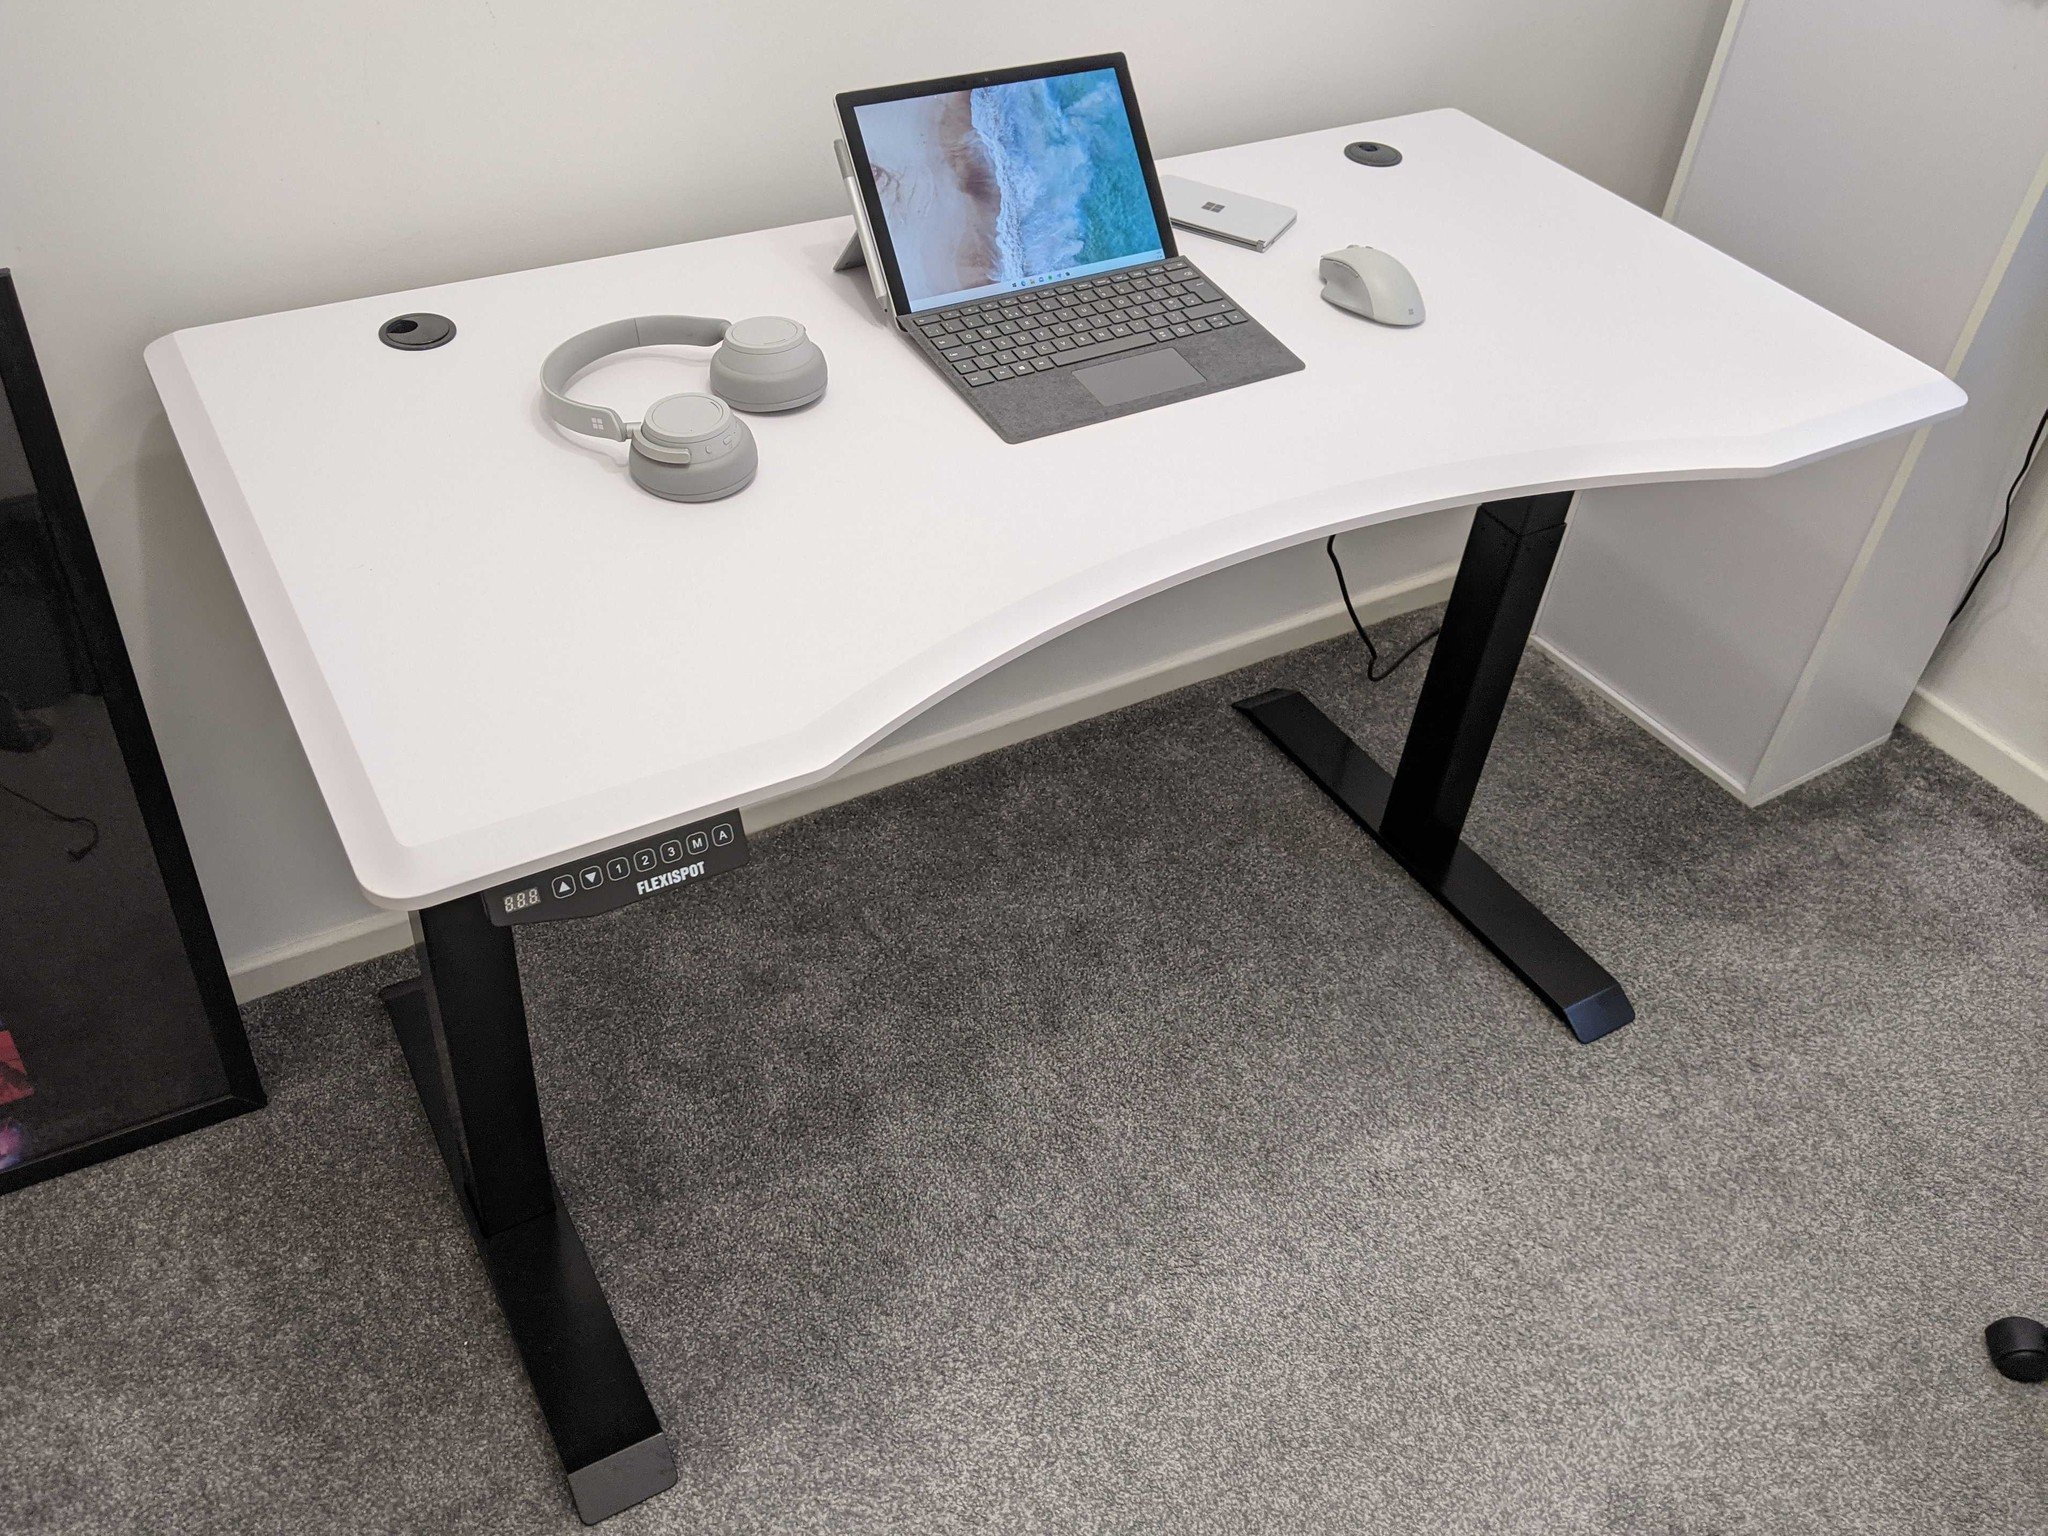 FlexiSpot E6 standing desk review: This impressive standing desk even has  an anti-collision system